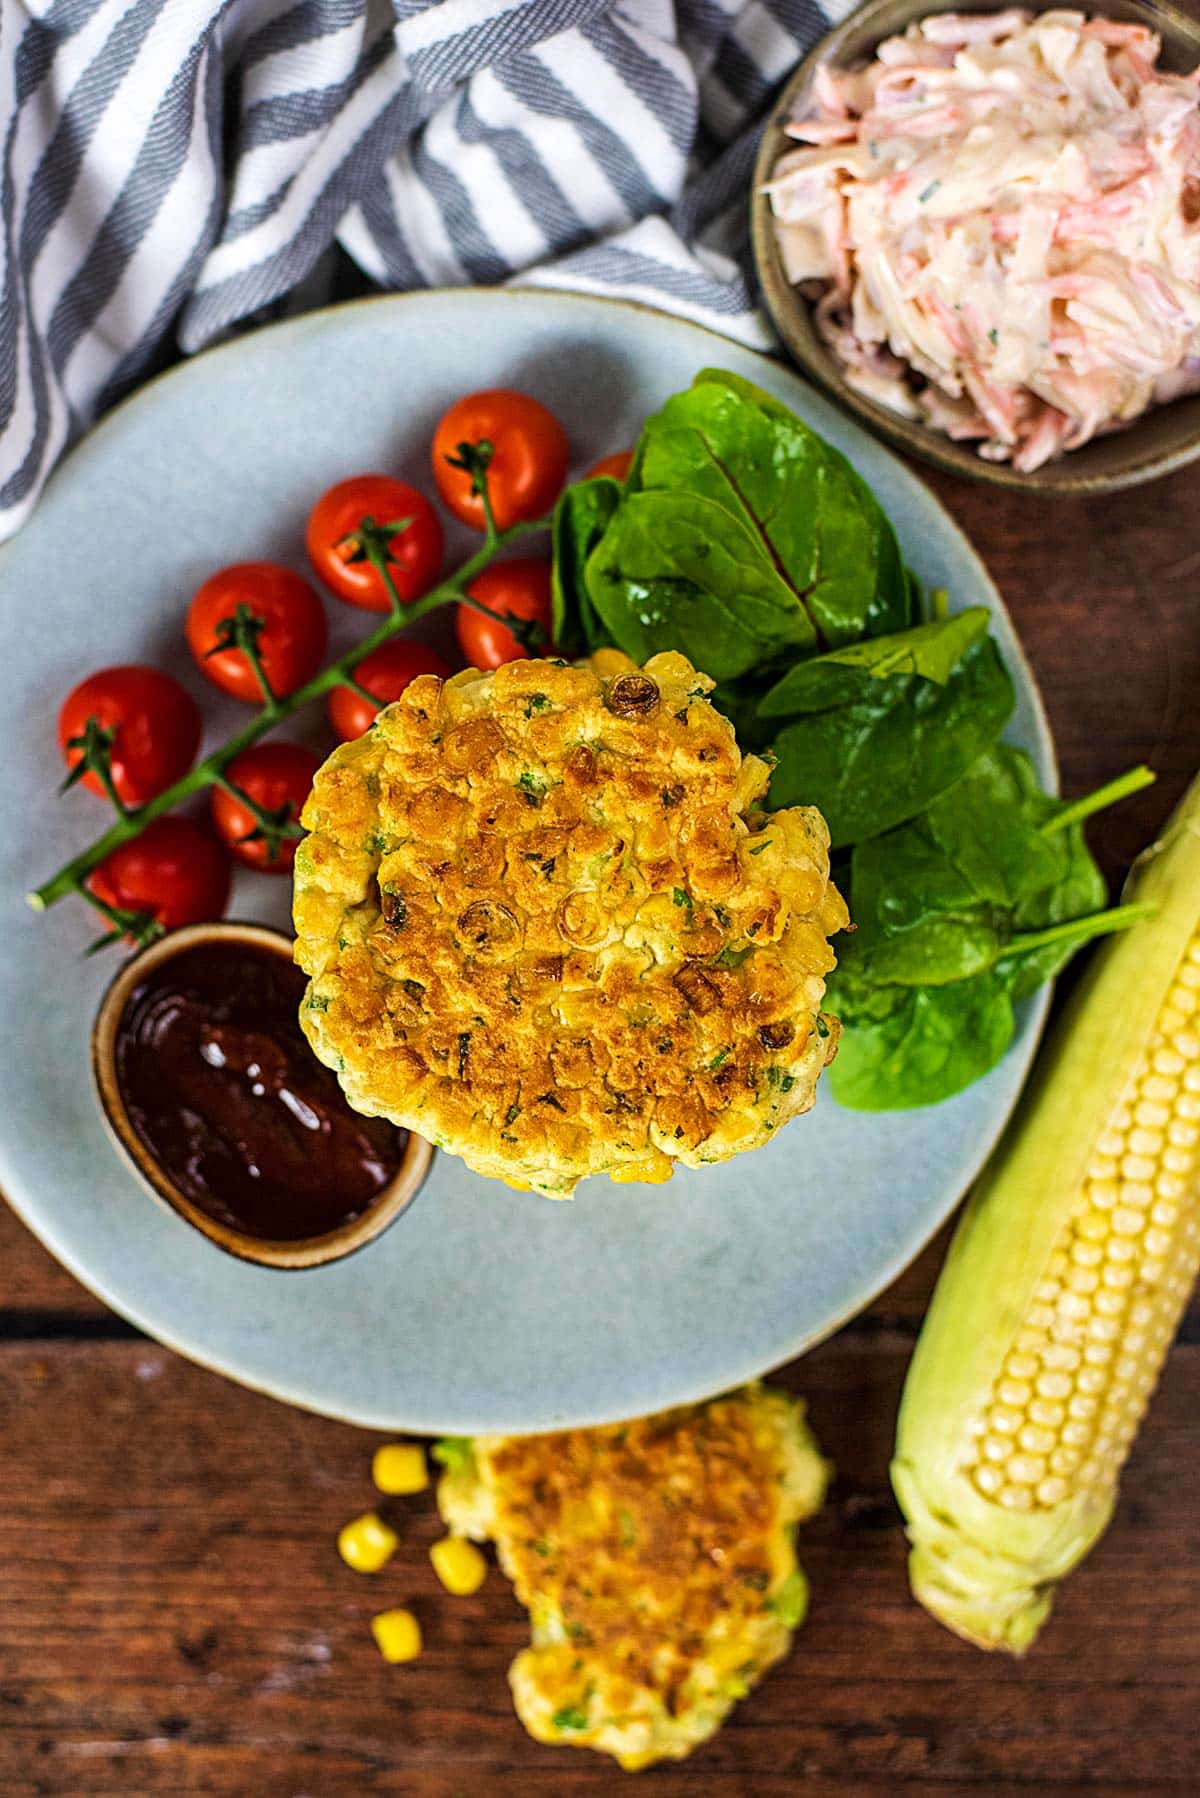 Sweetcorn fritters on a plate with cherry tomatoes, salad leaves and a pot of dip.